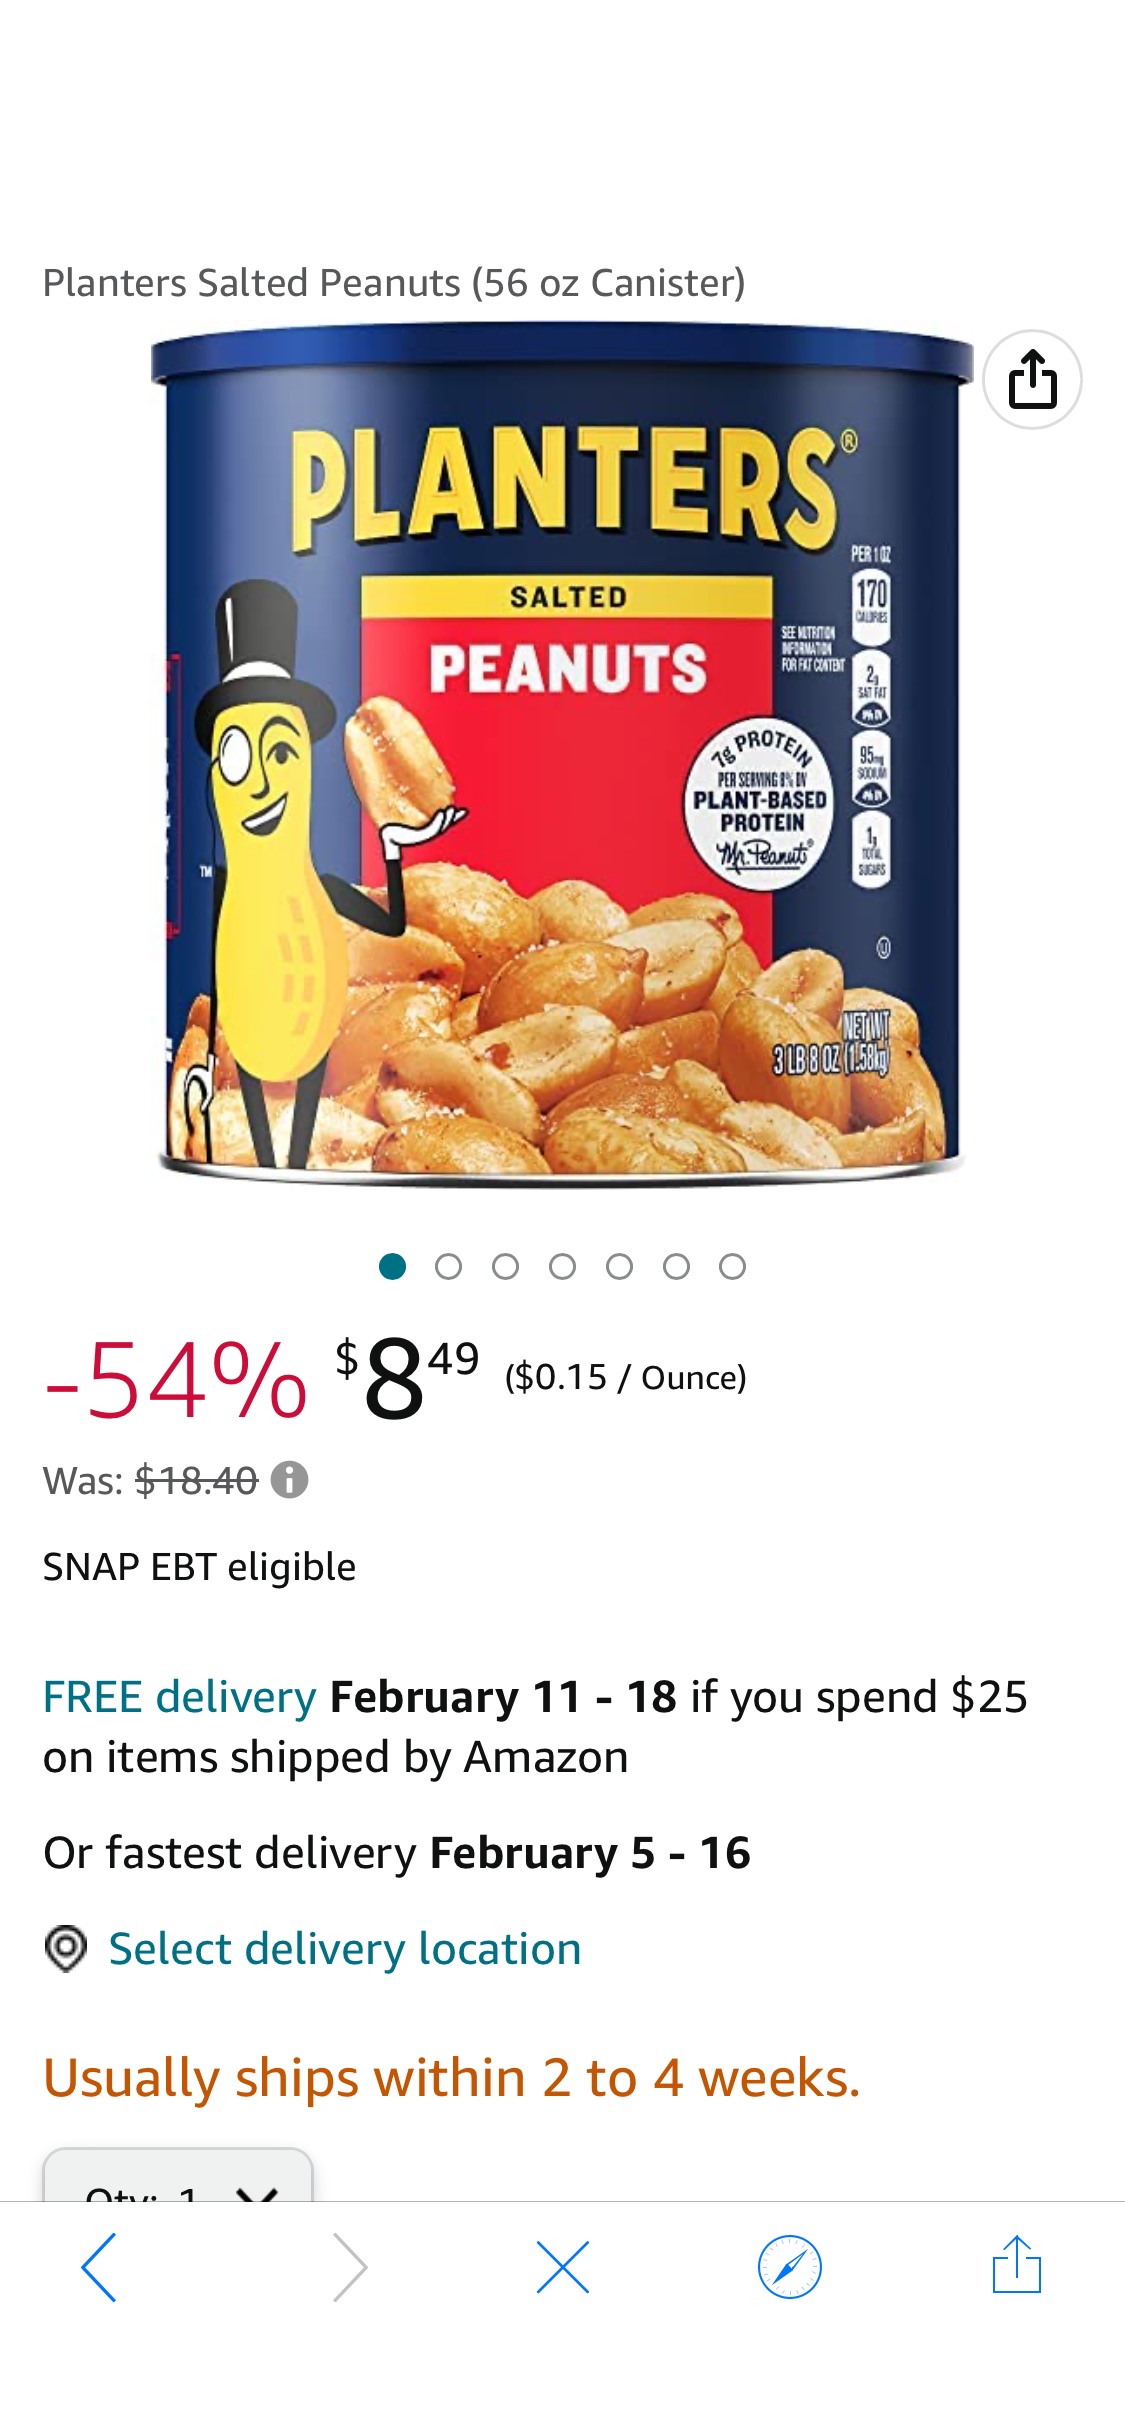 Amazon.com : Planters Salted Peanuts (56 oz Canister) : Grocery & Gourmet Food